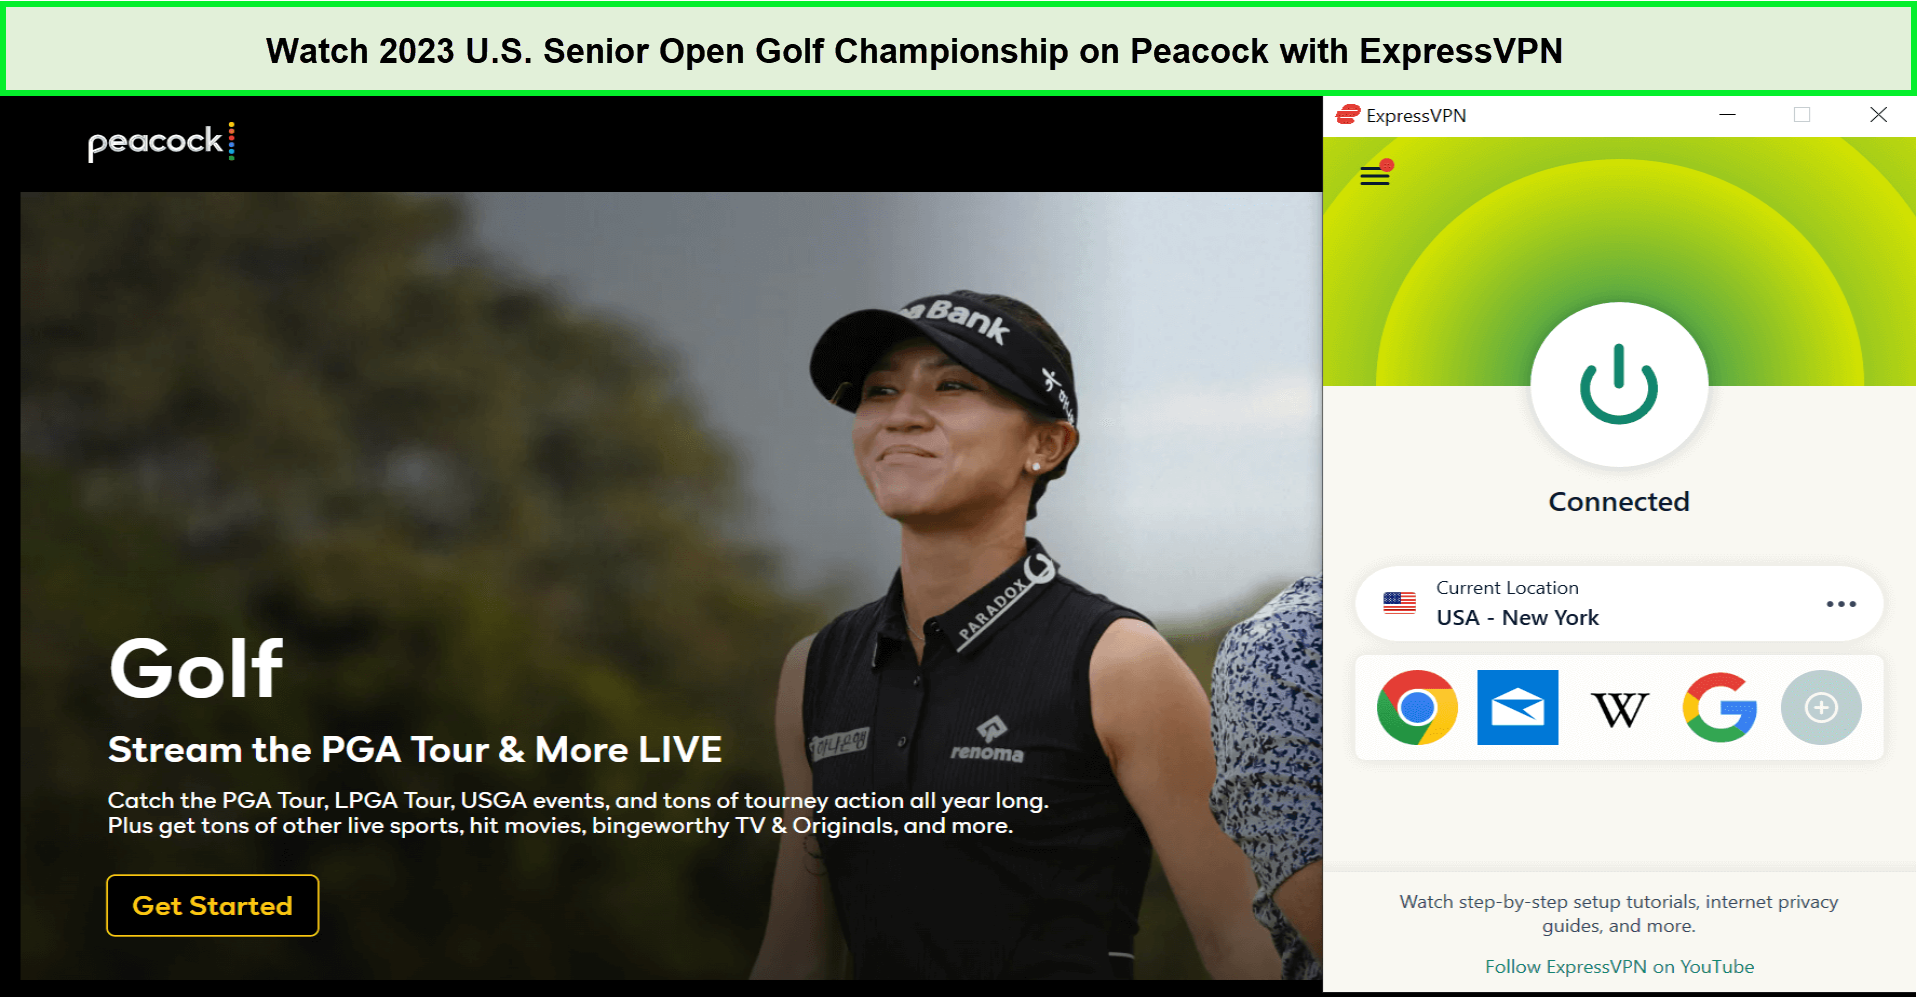 Watch-2023-U.S.-Senior-Open-Golf-Championship-in-Germany-on-Peacock-with-ExpressVPN